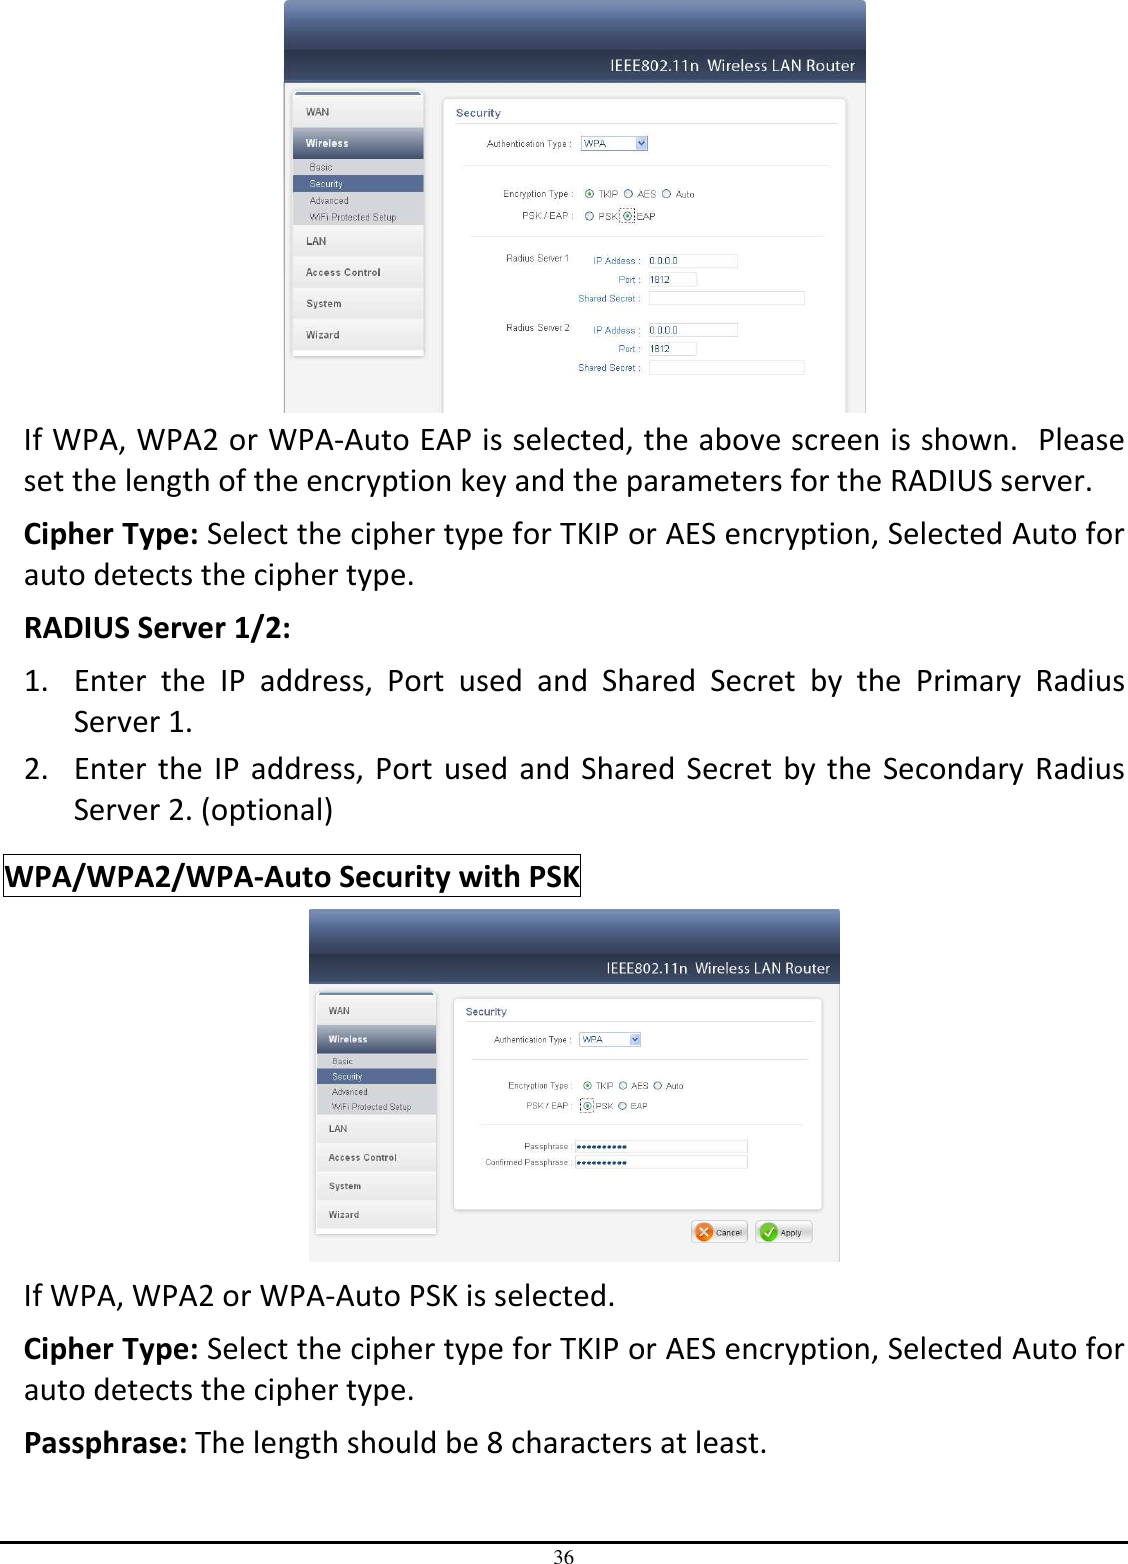 36  If WPA, WPA2 or WPA-Auto EAP is selected, the above screen is shown.  Please set the length of the encryption key and the parameters for the RADIUS server. Cipher Type: Select the cipher type for TKIP or AES encryption, Selected Auto for auto detects the cipher type.  RADIUS Server 1/2: 1. Enter  the  IP  address,  Port  used  and  Shared  Secret  by  the  Primary  Radius Server 1. 2. Enter the IP  address, Port  used and Shared  Secret by the  Secondary Radius Server 2. (optional) WPA/WPA2/WPA-Auto Security with PSK  If WPA, WPA2 or WPA-Auto PSK is selected. Cipher Type: Select the cipher type for TKIP or AES encryption, Selected Auto for auto detects the cipher type.  Passphrase: The length should be 8 characters at least.   